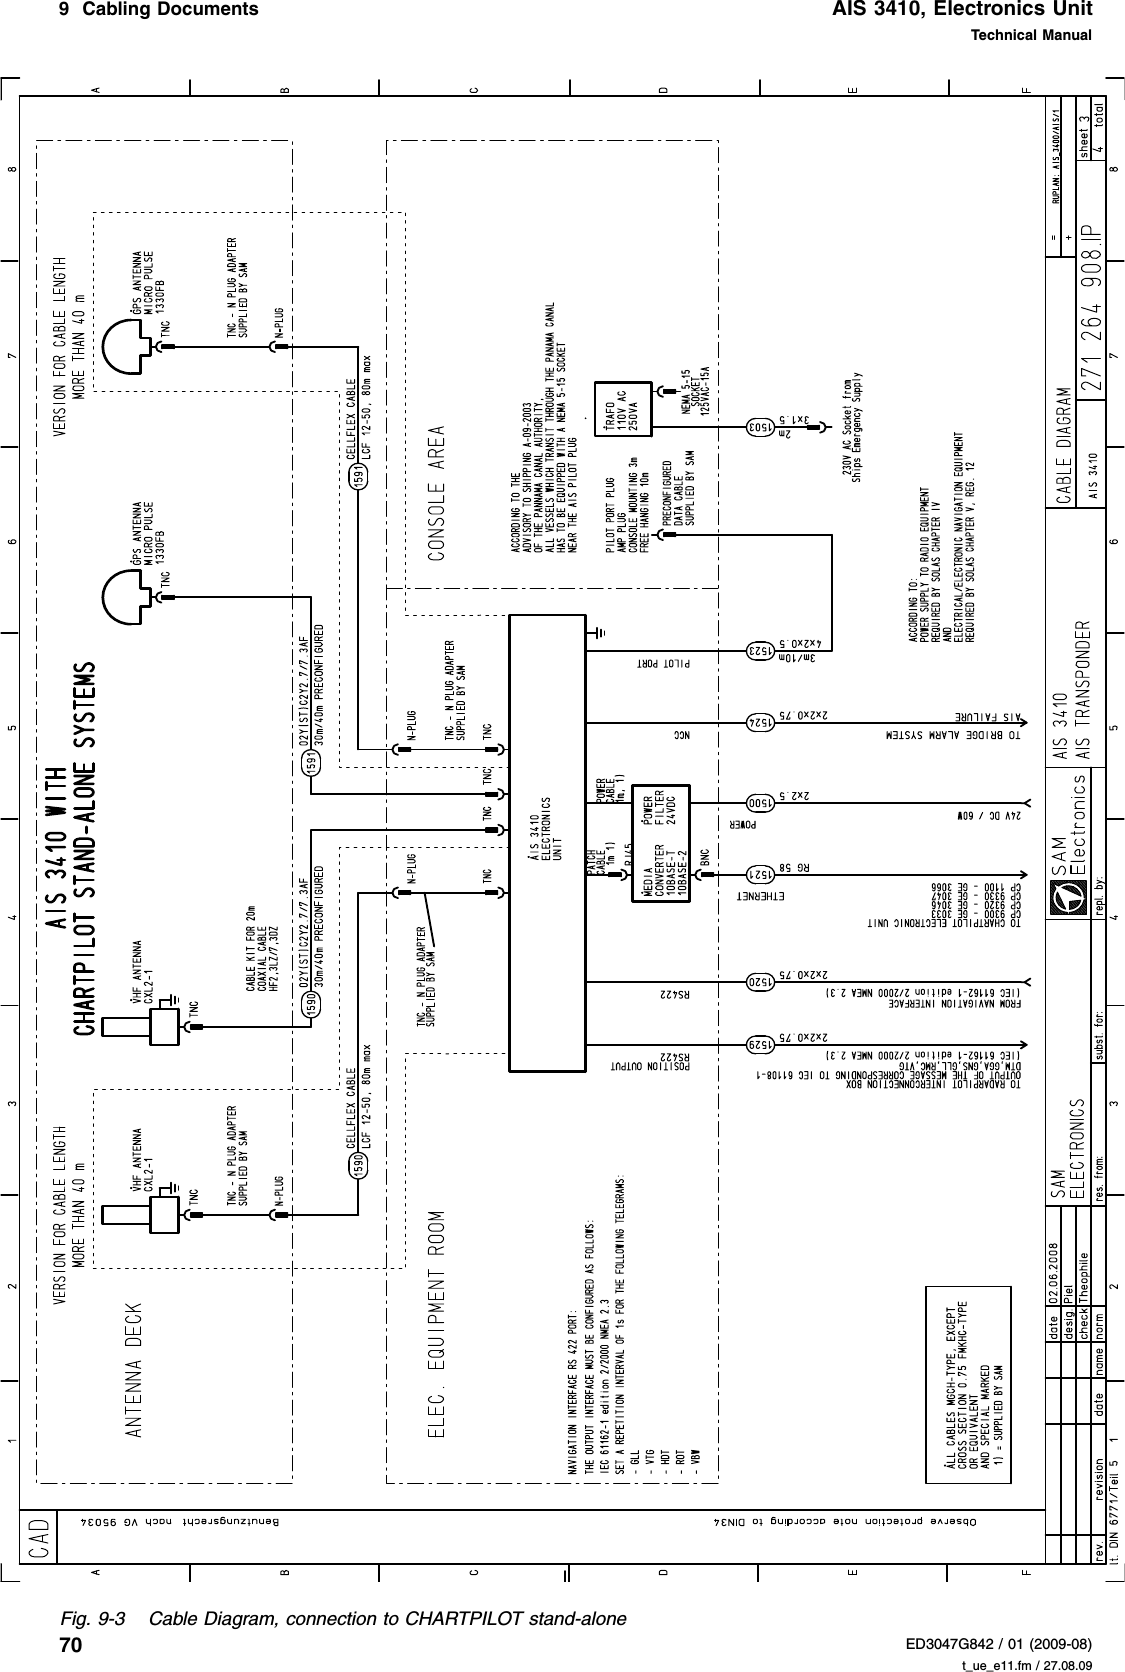 AIS 3410, Electronics UnitED3047G842 / 01 (2009-08)Technical Manual9  Cabling Documents   t_ue_e11.fm / 27.08.0970Fig. 9-3 Cable Diagram, connection to CHARTPILOT stand-alone